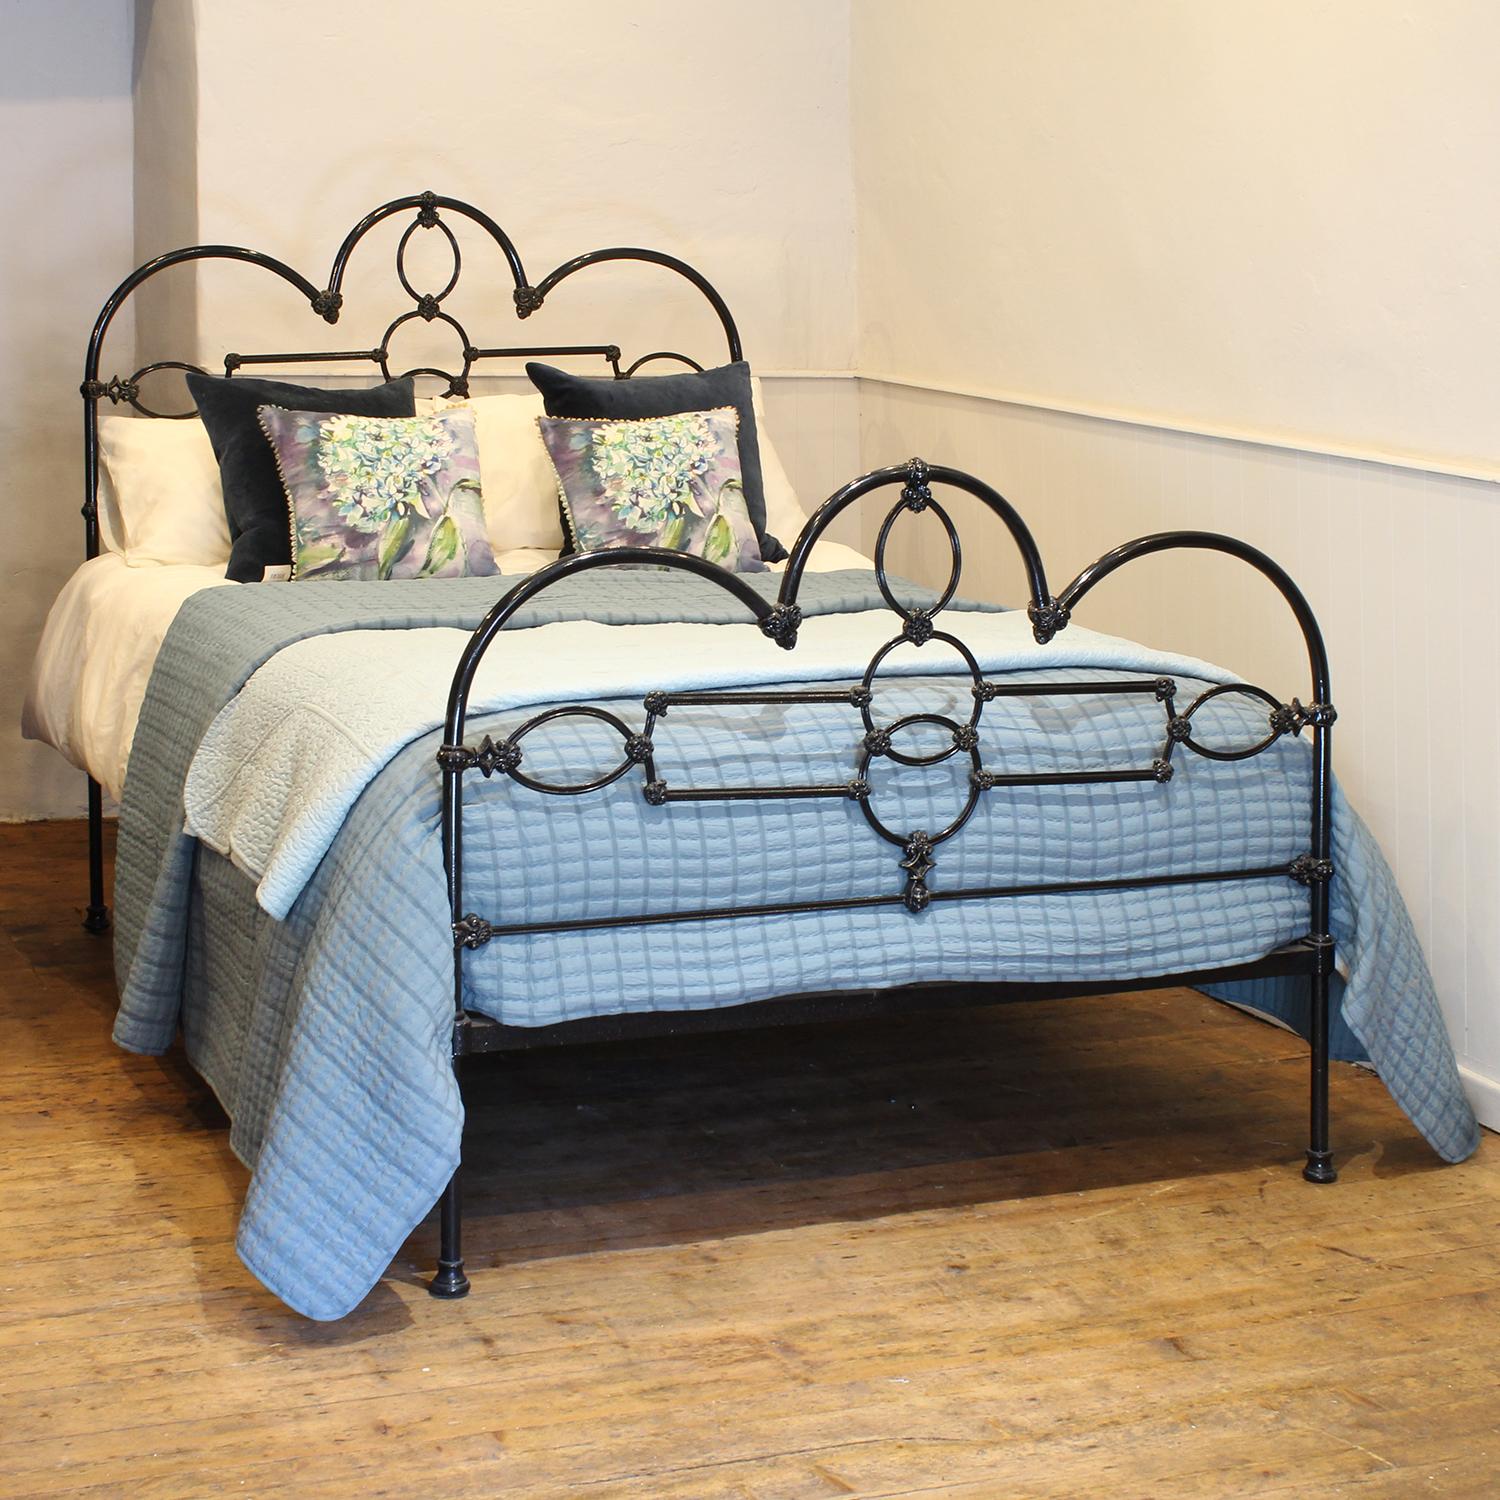 Victorian brass and cast iron bedstead, finished in black with decorative castings and a hoop design.
Some of the castings have faded gold lining highlighting the mouldings.

This bed accepts a double size 4ft 6in wide (54 inch or 135cm) base and